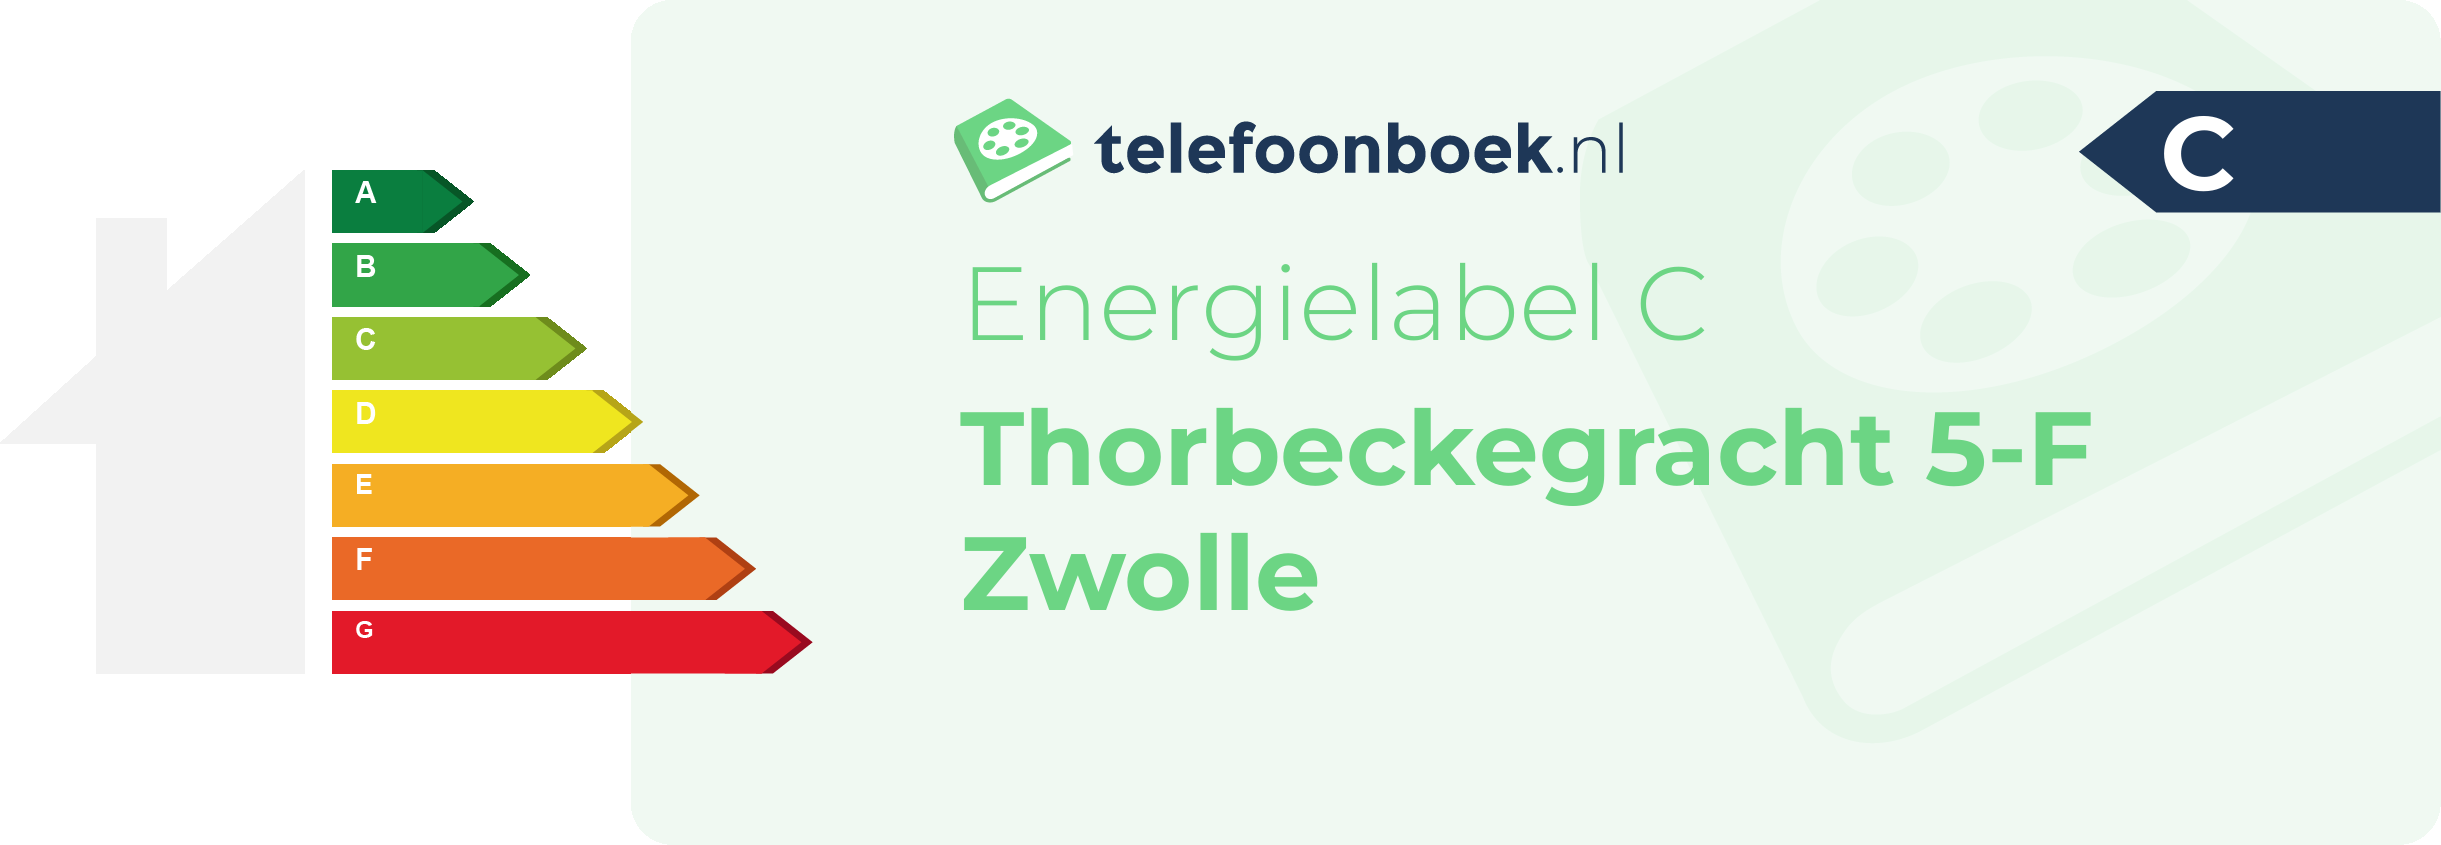 Energielabel Thorbeckegracht 5-F Zwolle